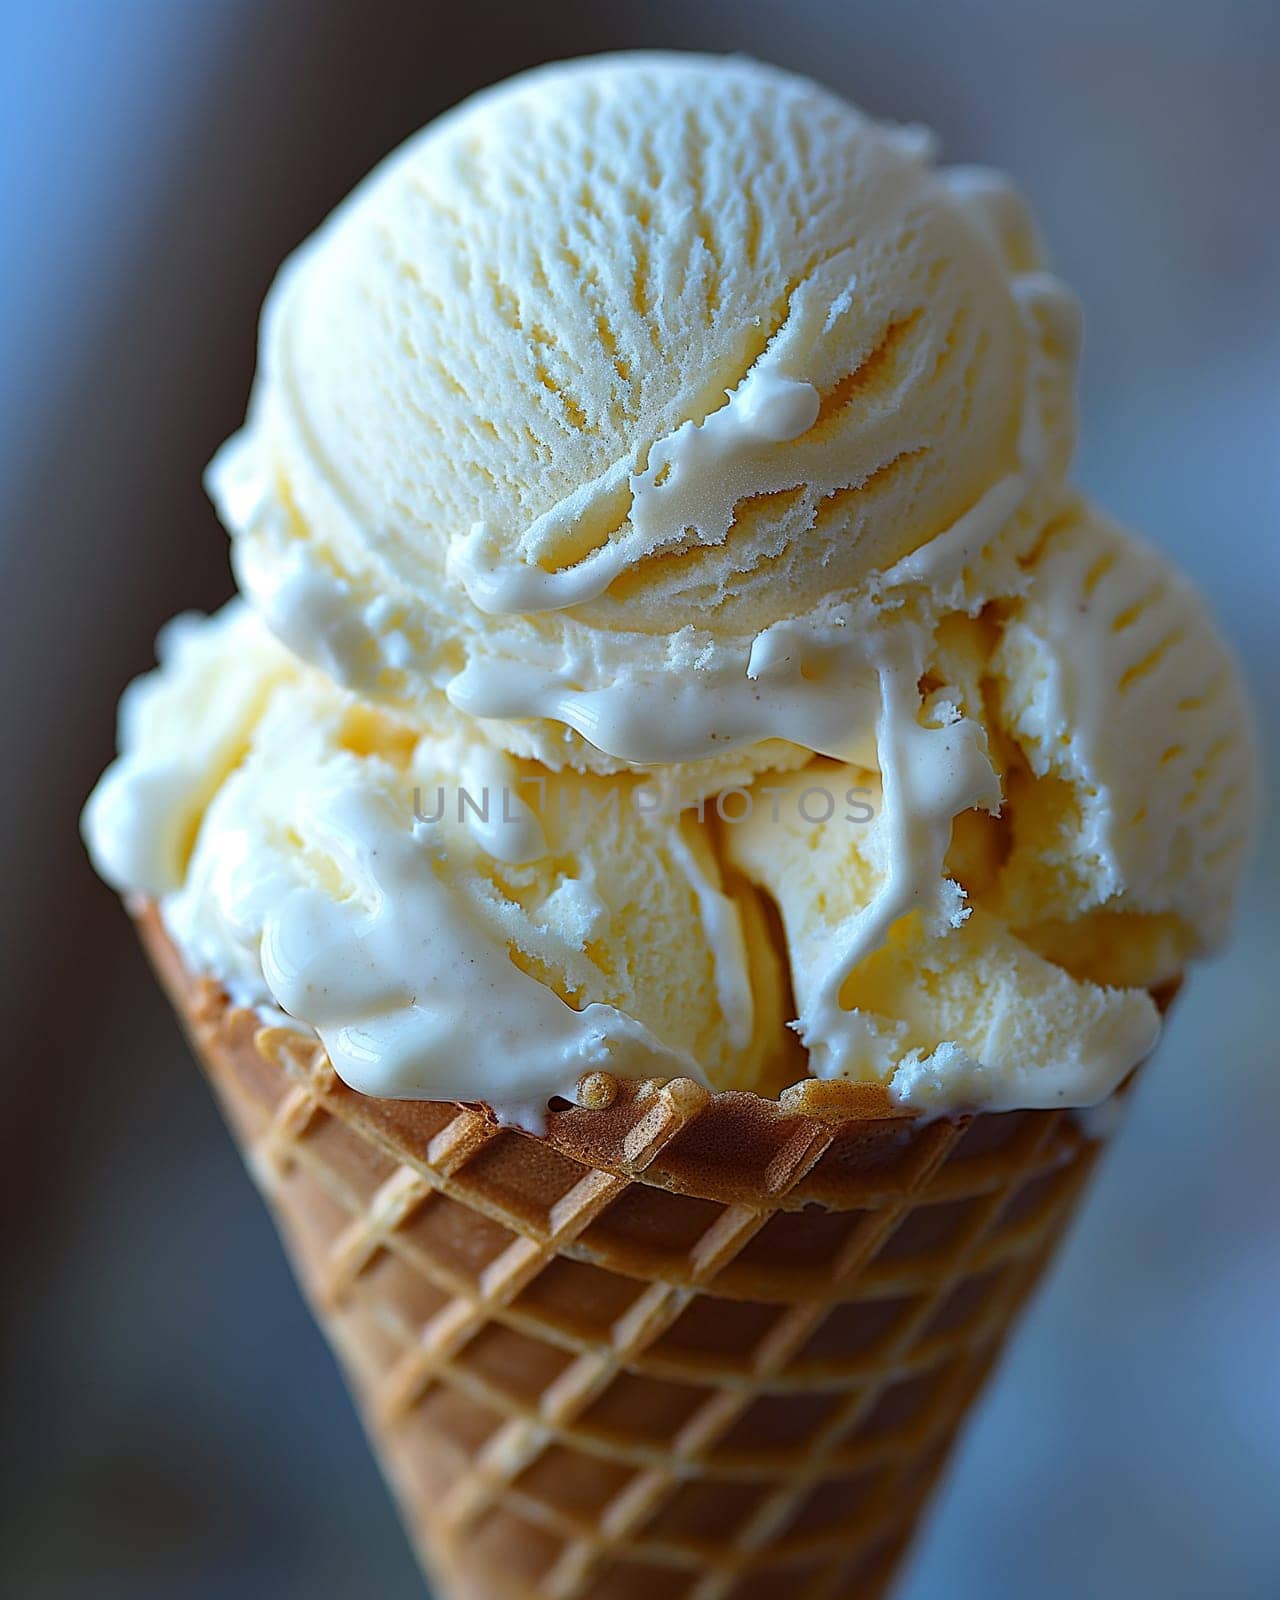 A single scoop of vanilla ice cream on a waffle cone. by Hype2art